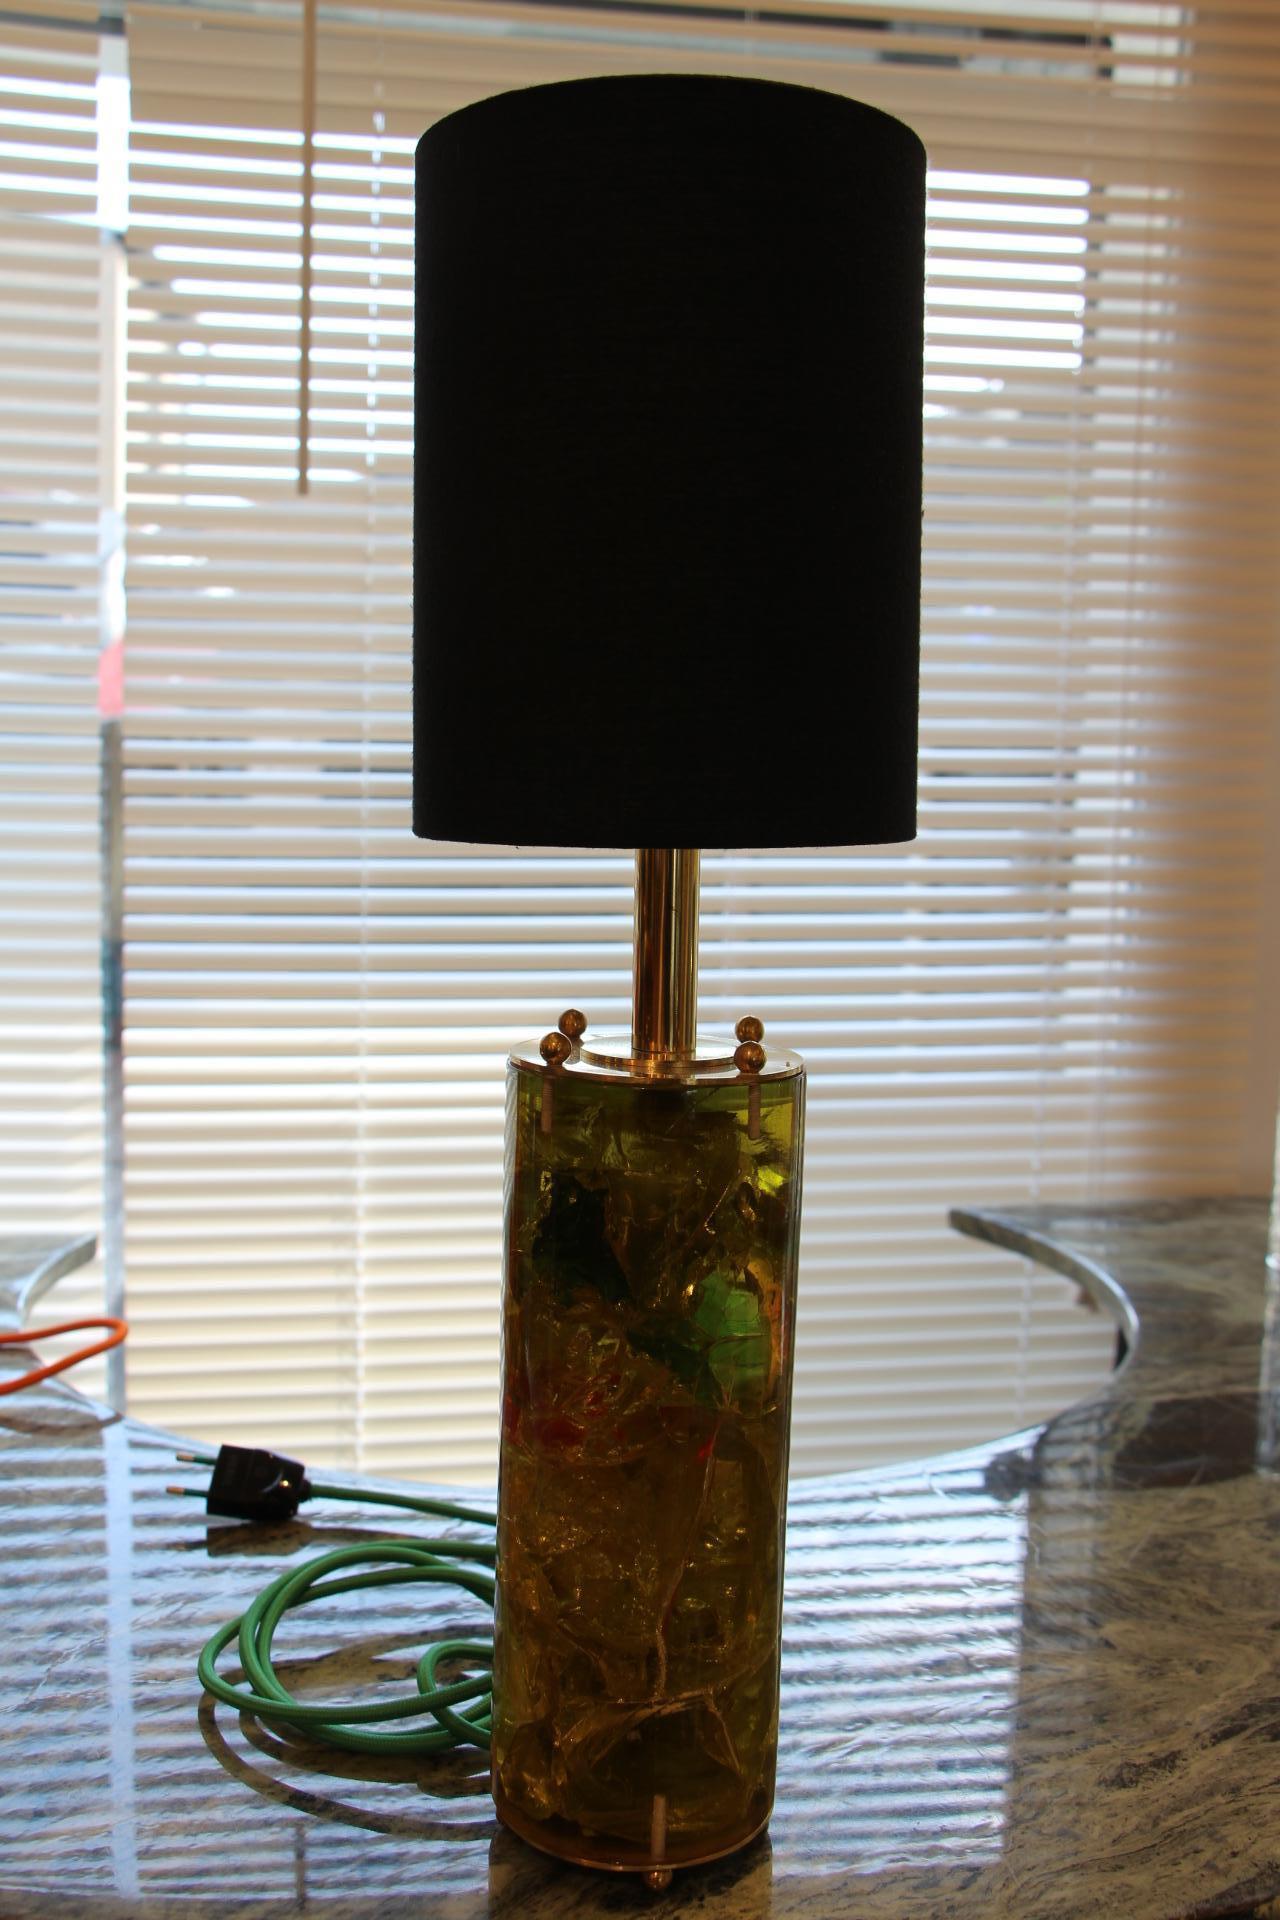 This cylindrical lamps is very poetic with all its small captivated fragments. Its color ranges from yellow to green with dark green and red inclusions. It always seems to be in movement.
Its total height including its shade is 51 cm, the height of